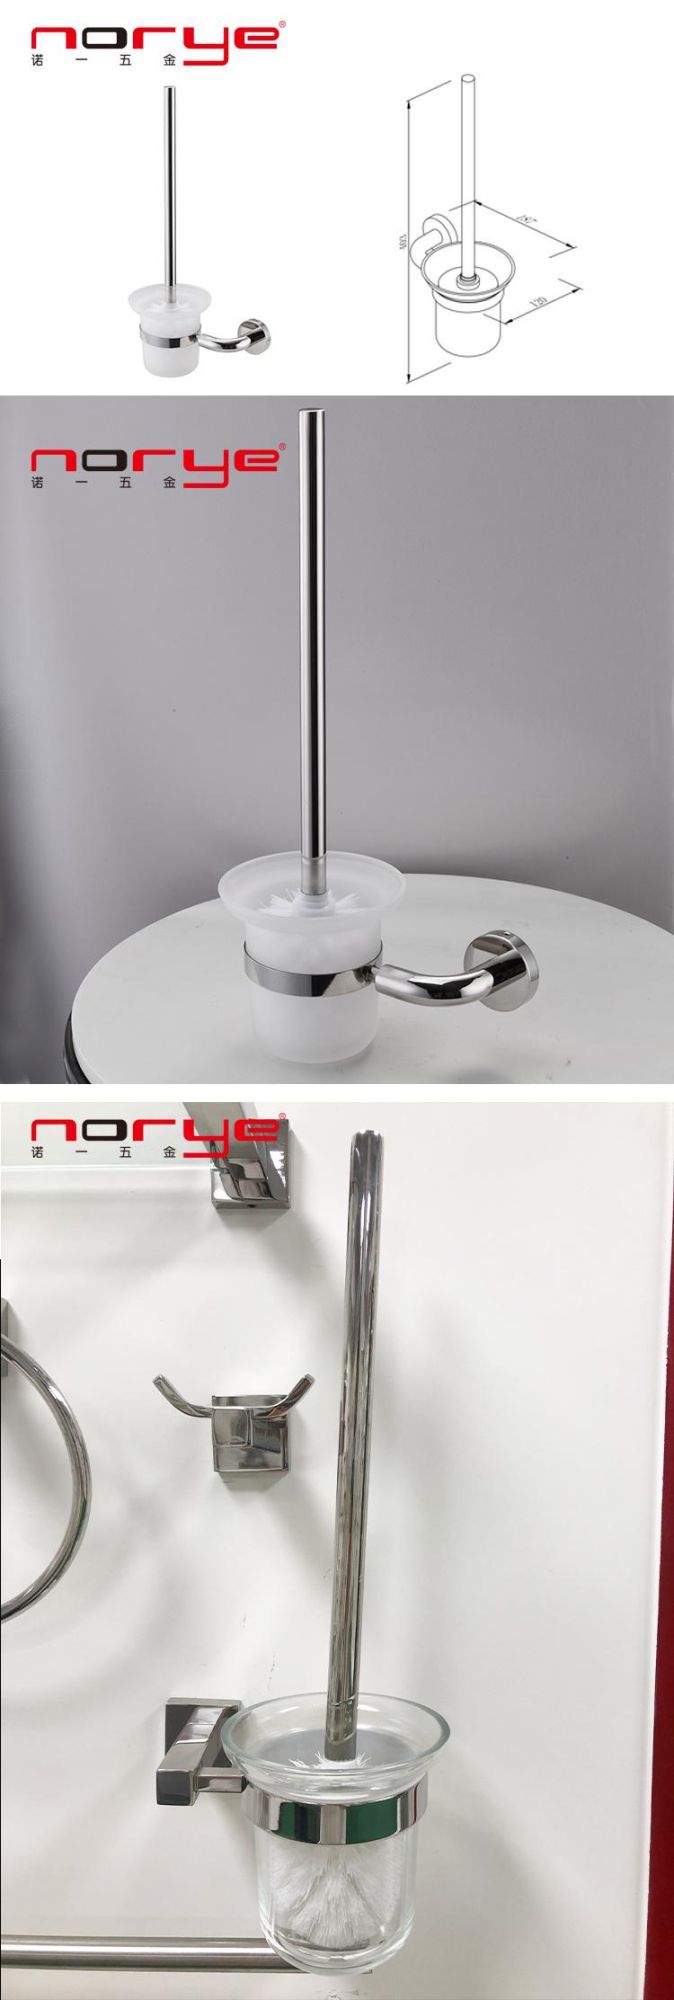 Stainless Steel Toilet Brush Holder Modern Wall Mounted Bathroom Accessories